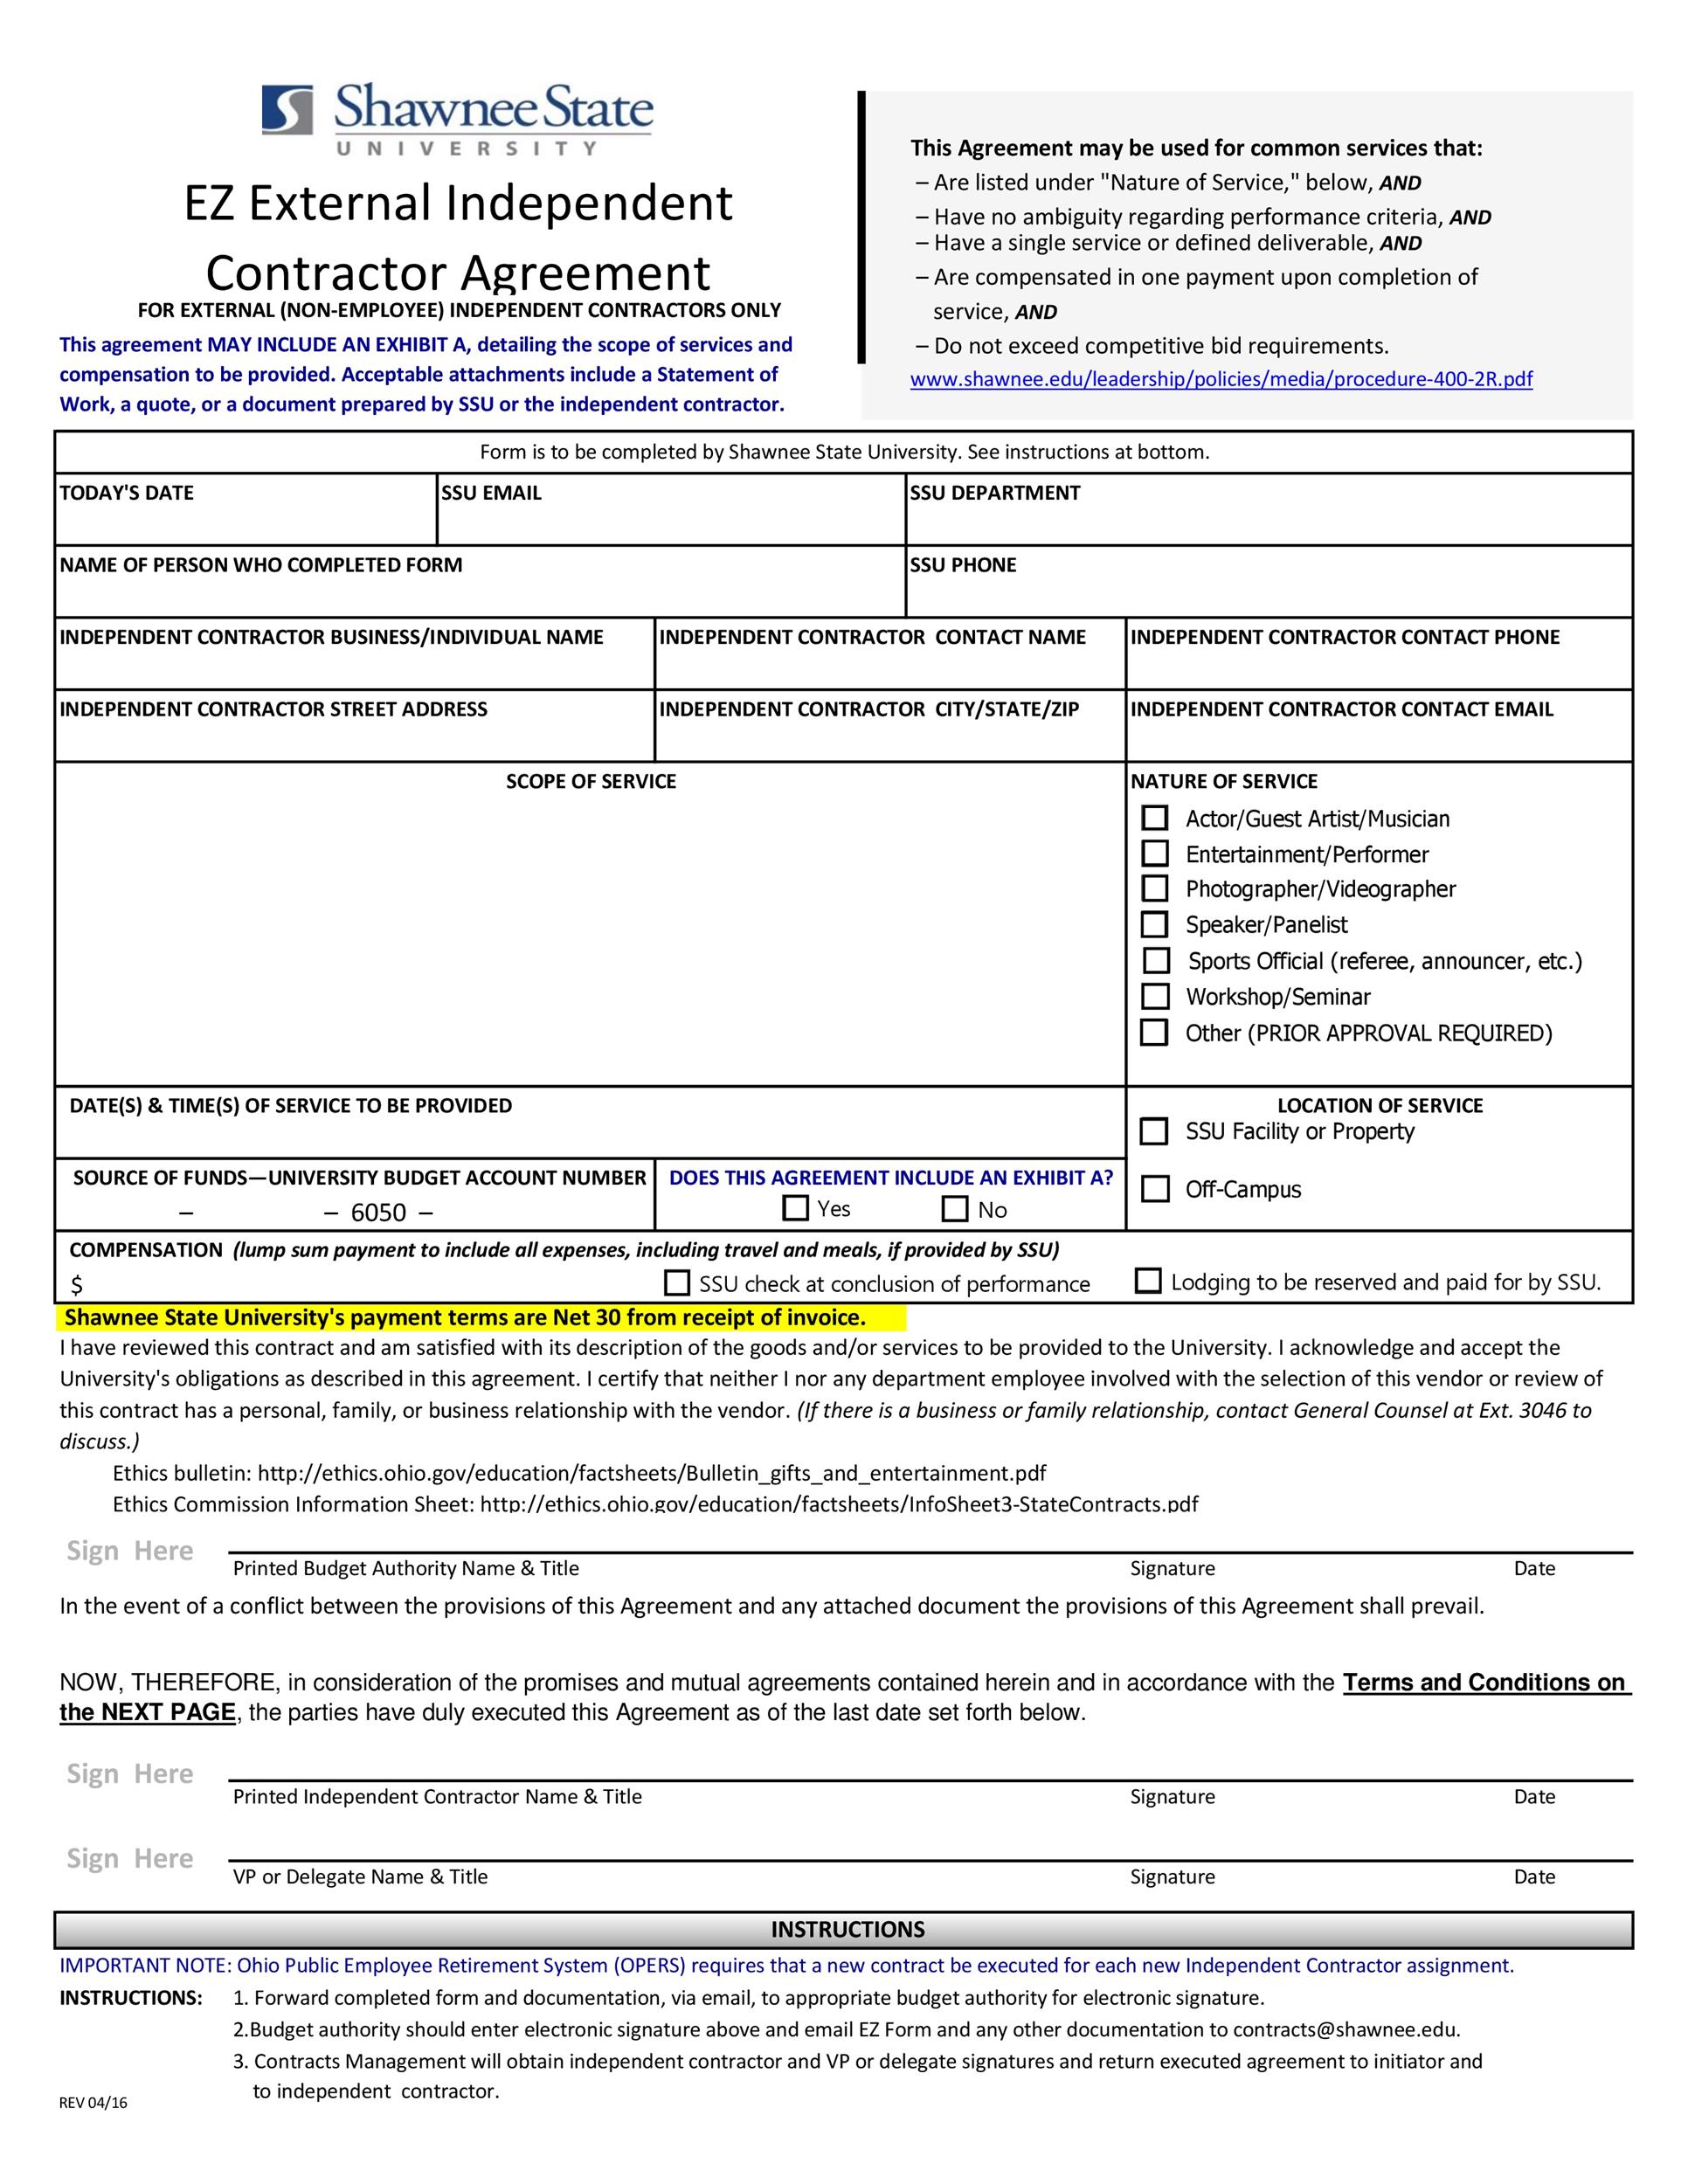 Free independent contractor agreement 49